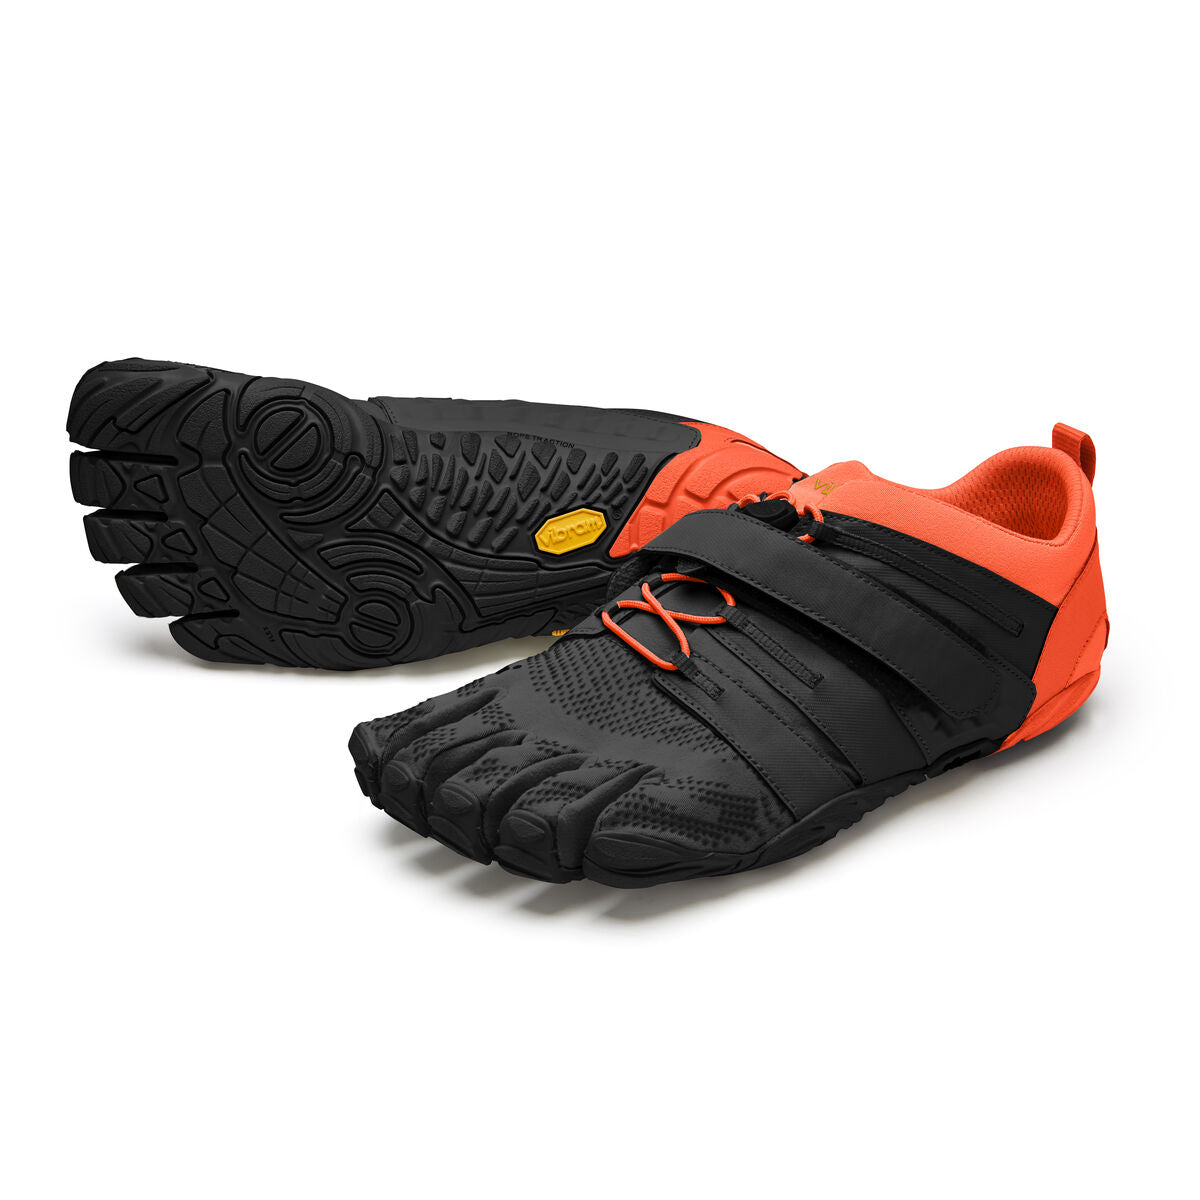 Men's Vibram Five Fingers V-Train 2.0 Fitness and Training Shoe in Black/Orange from the front